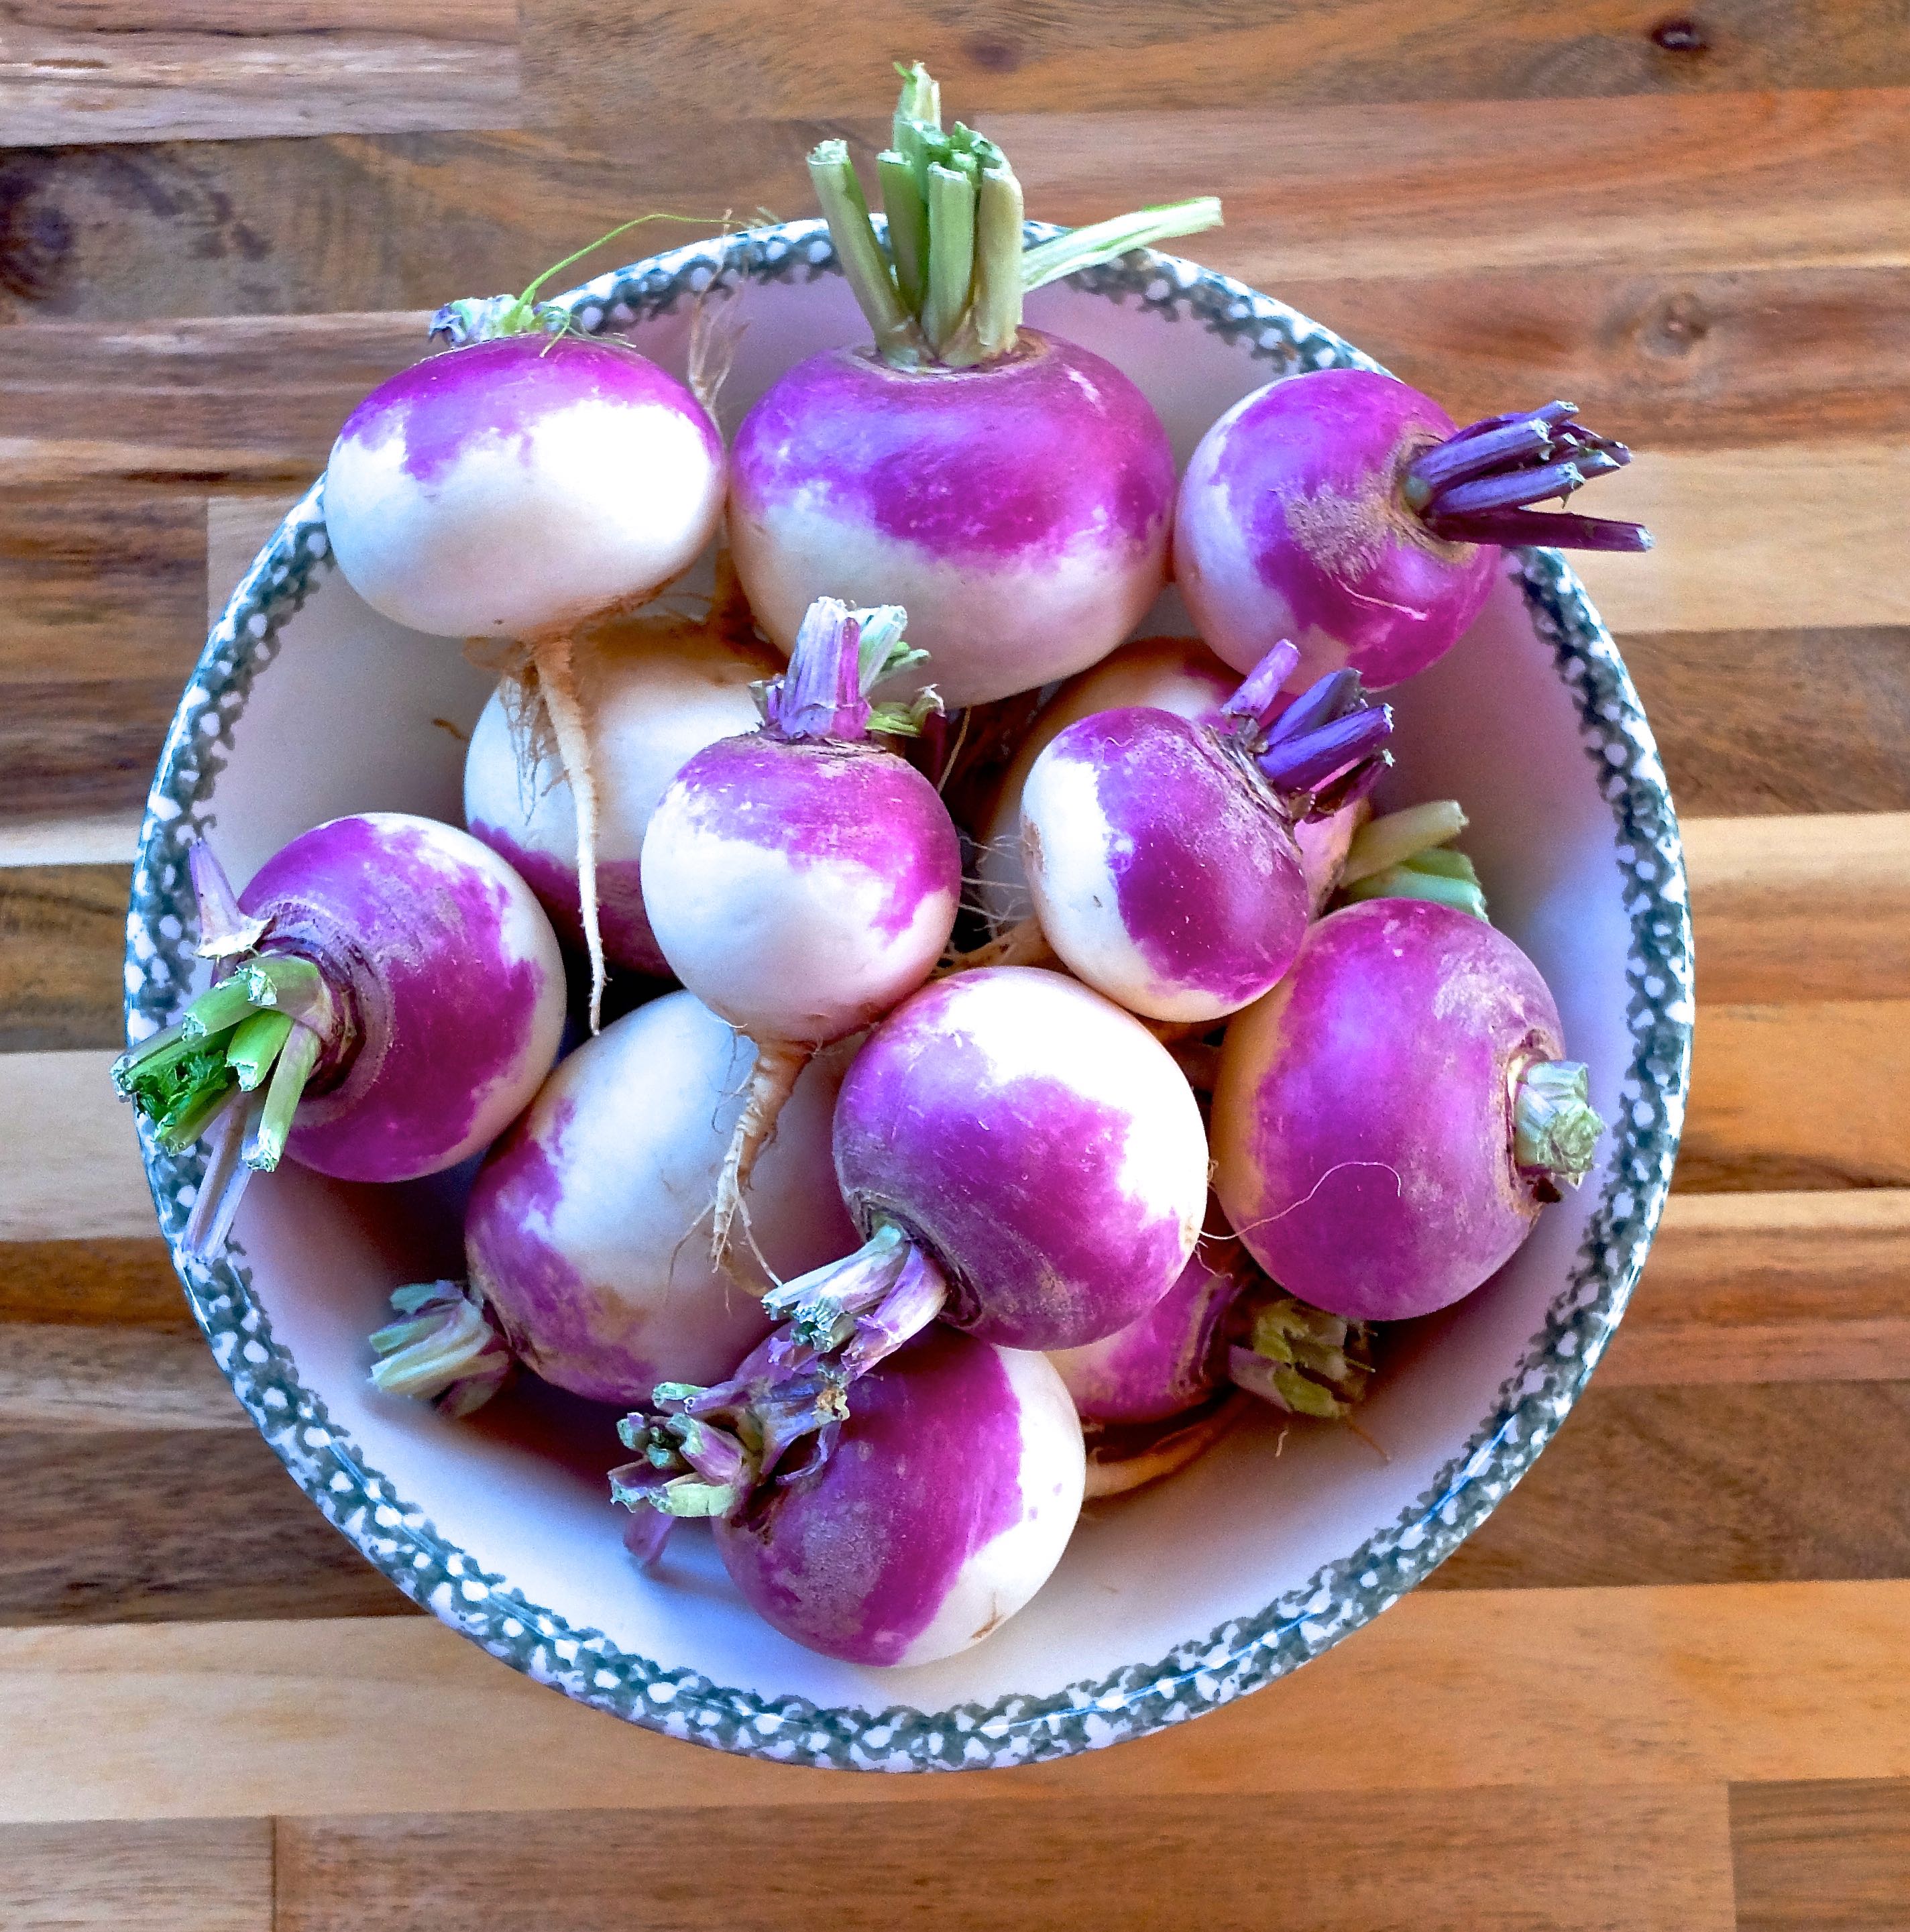 Start with 3-5 pounds of fresh produce, such as these turnips. 